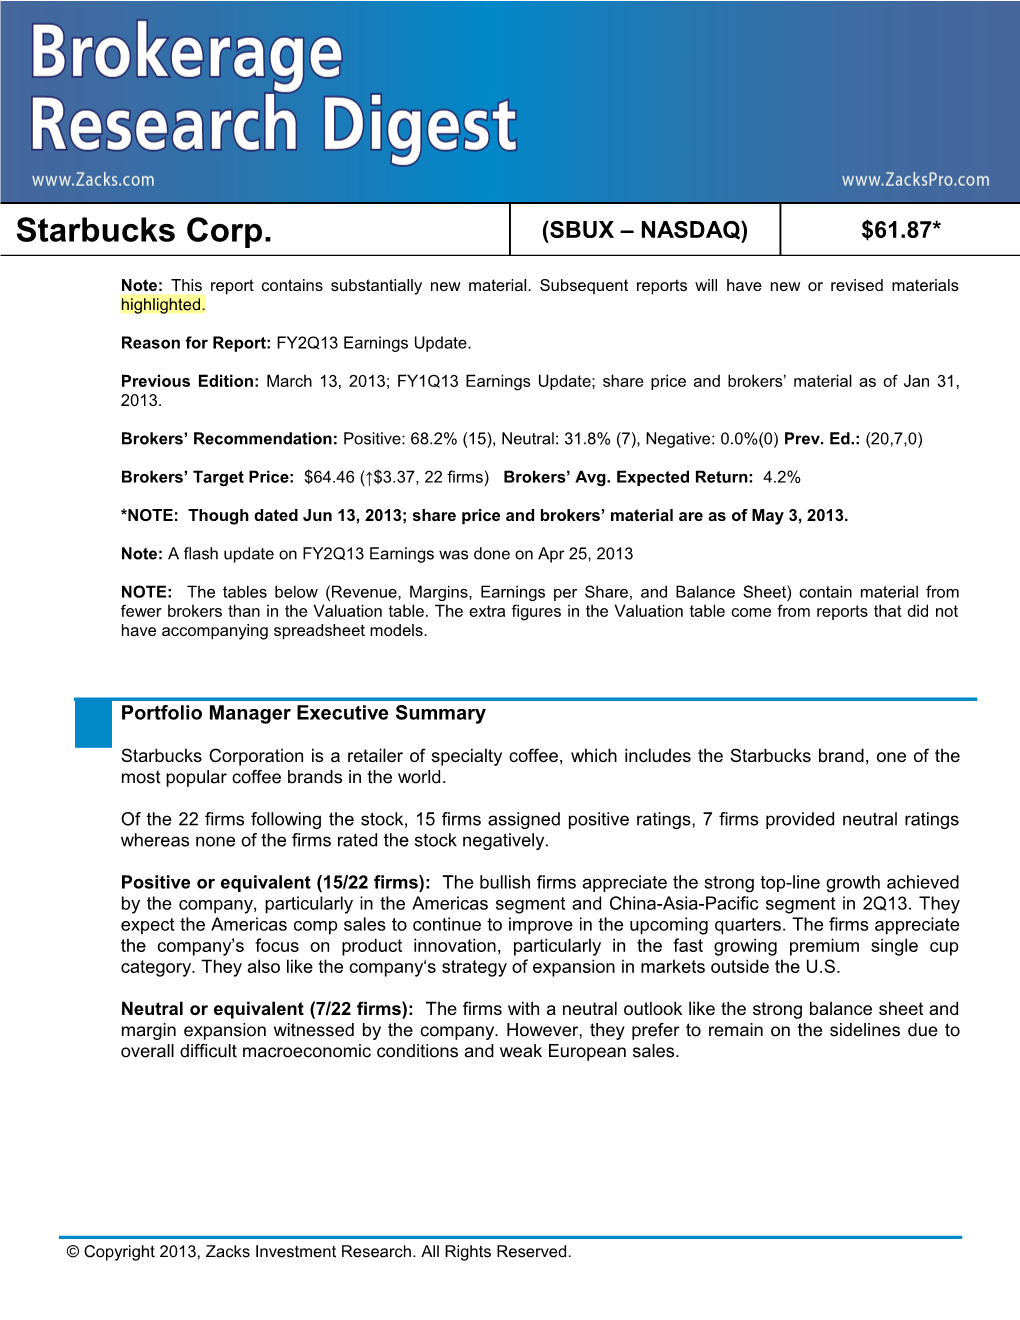 Reason for Report: FY2Q13 Earnings Update